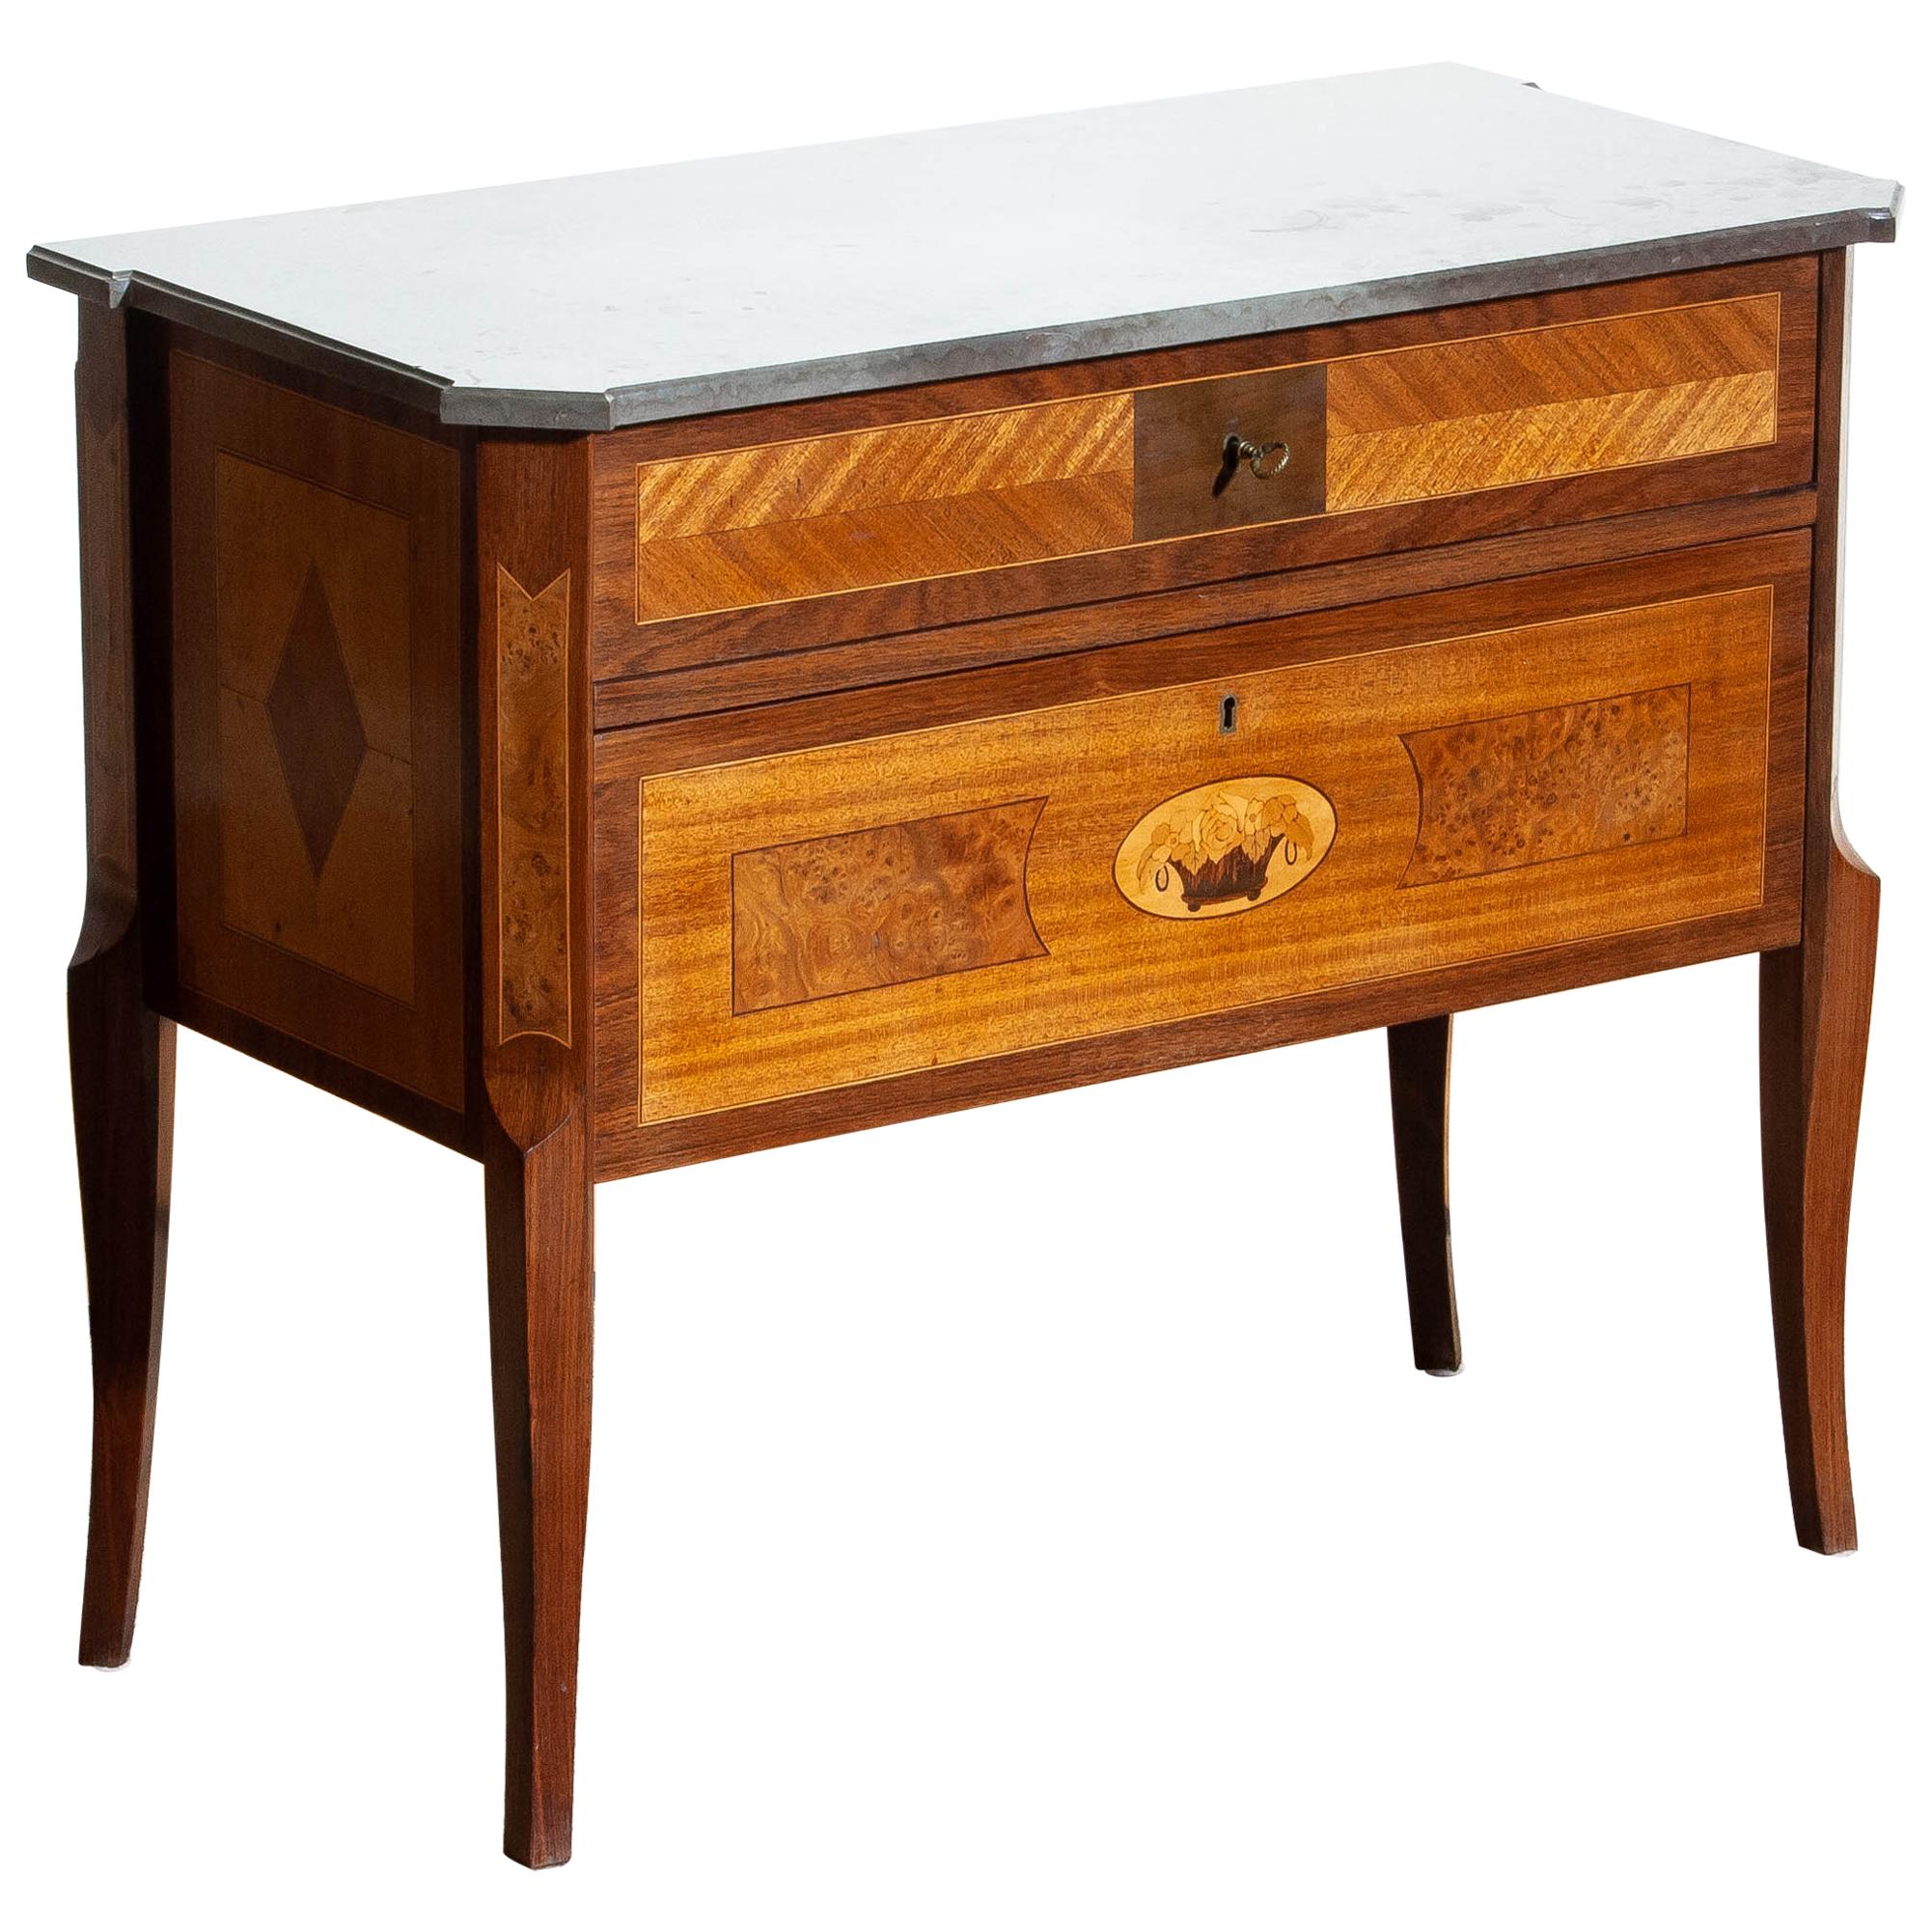 Beautiful commode with large selection of wood craft techniques using mahogany, walnut, birch and various fruitwoods with a Kolmarden top.
Origin: Stockholm, Sweden, circa 1909.
The overall condition is good.
We ship in plywood crates!